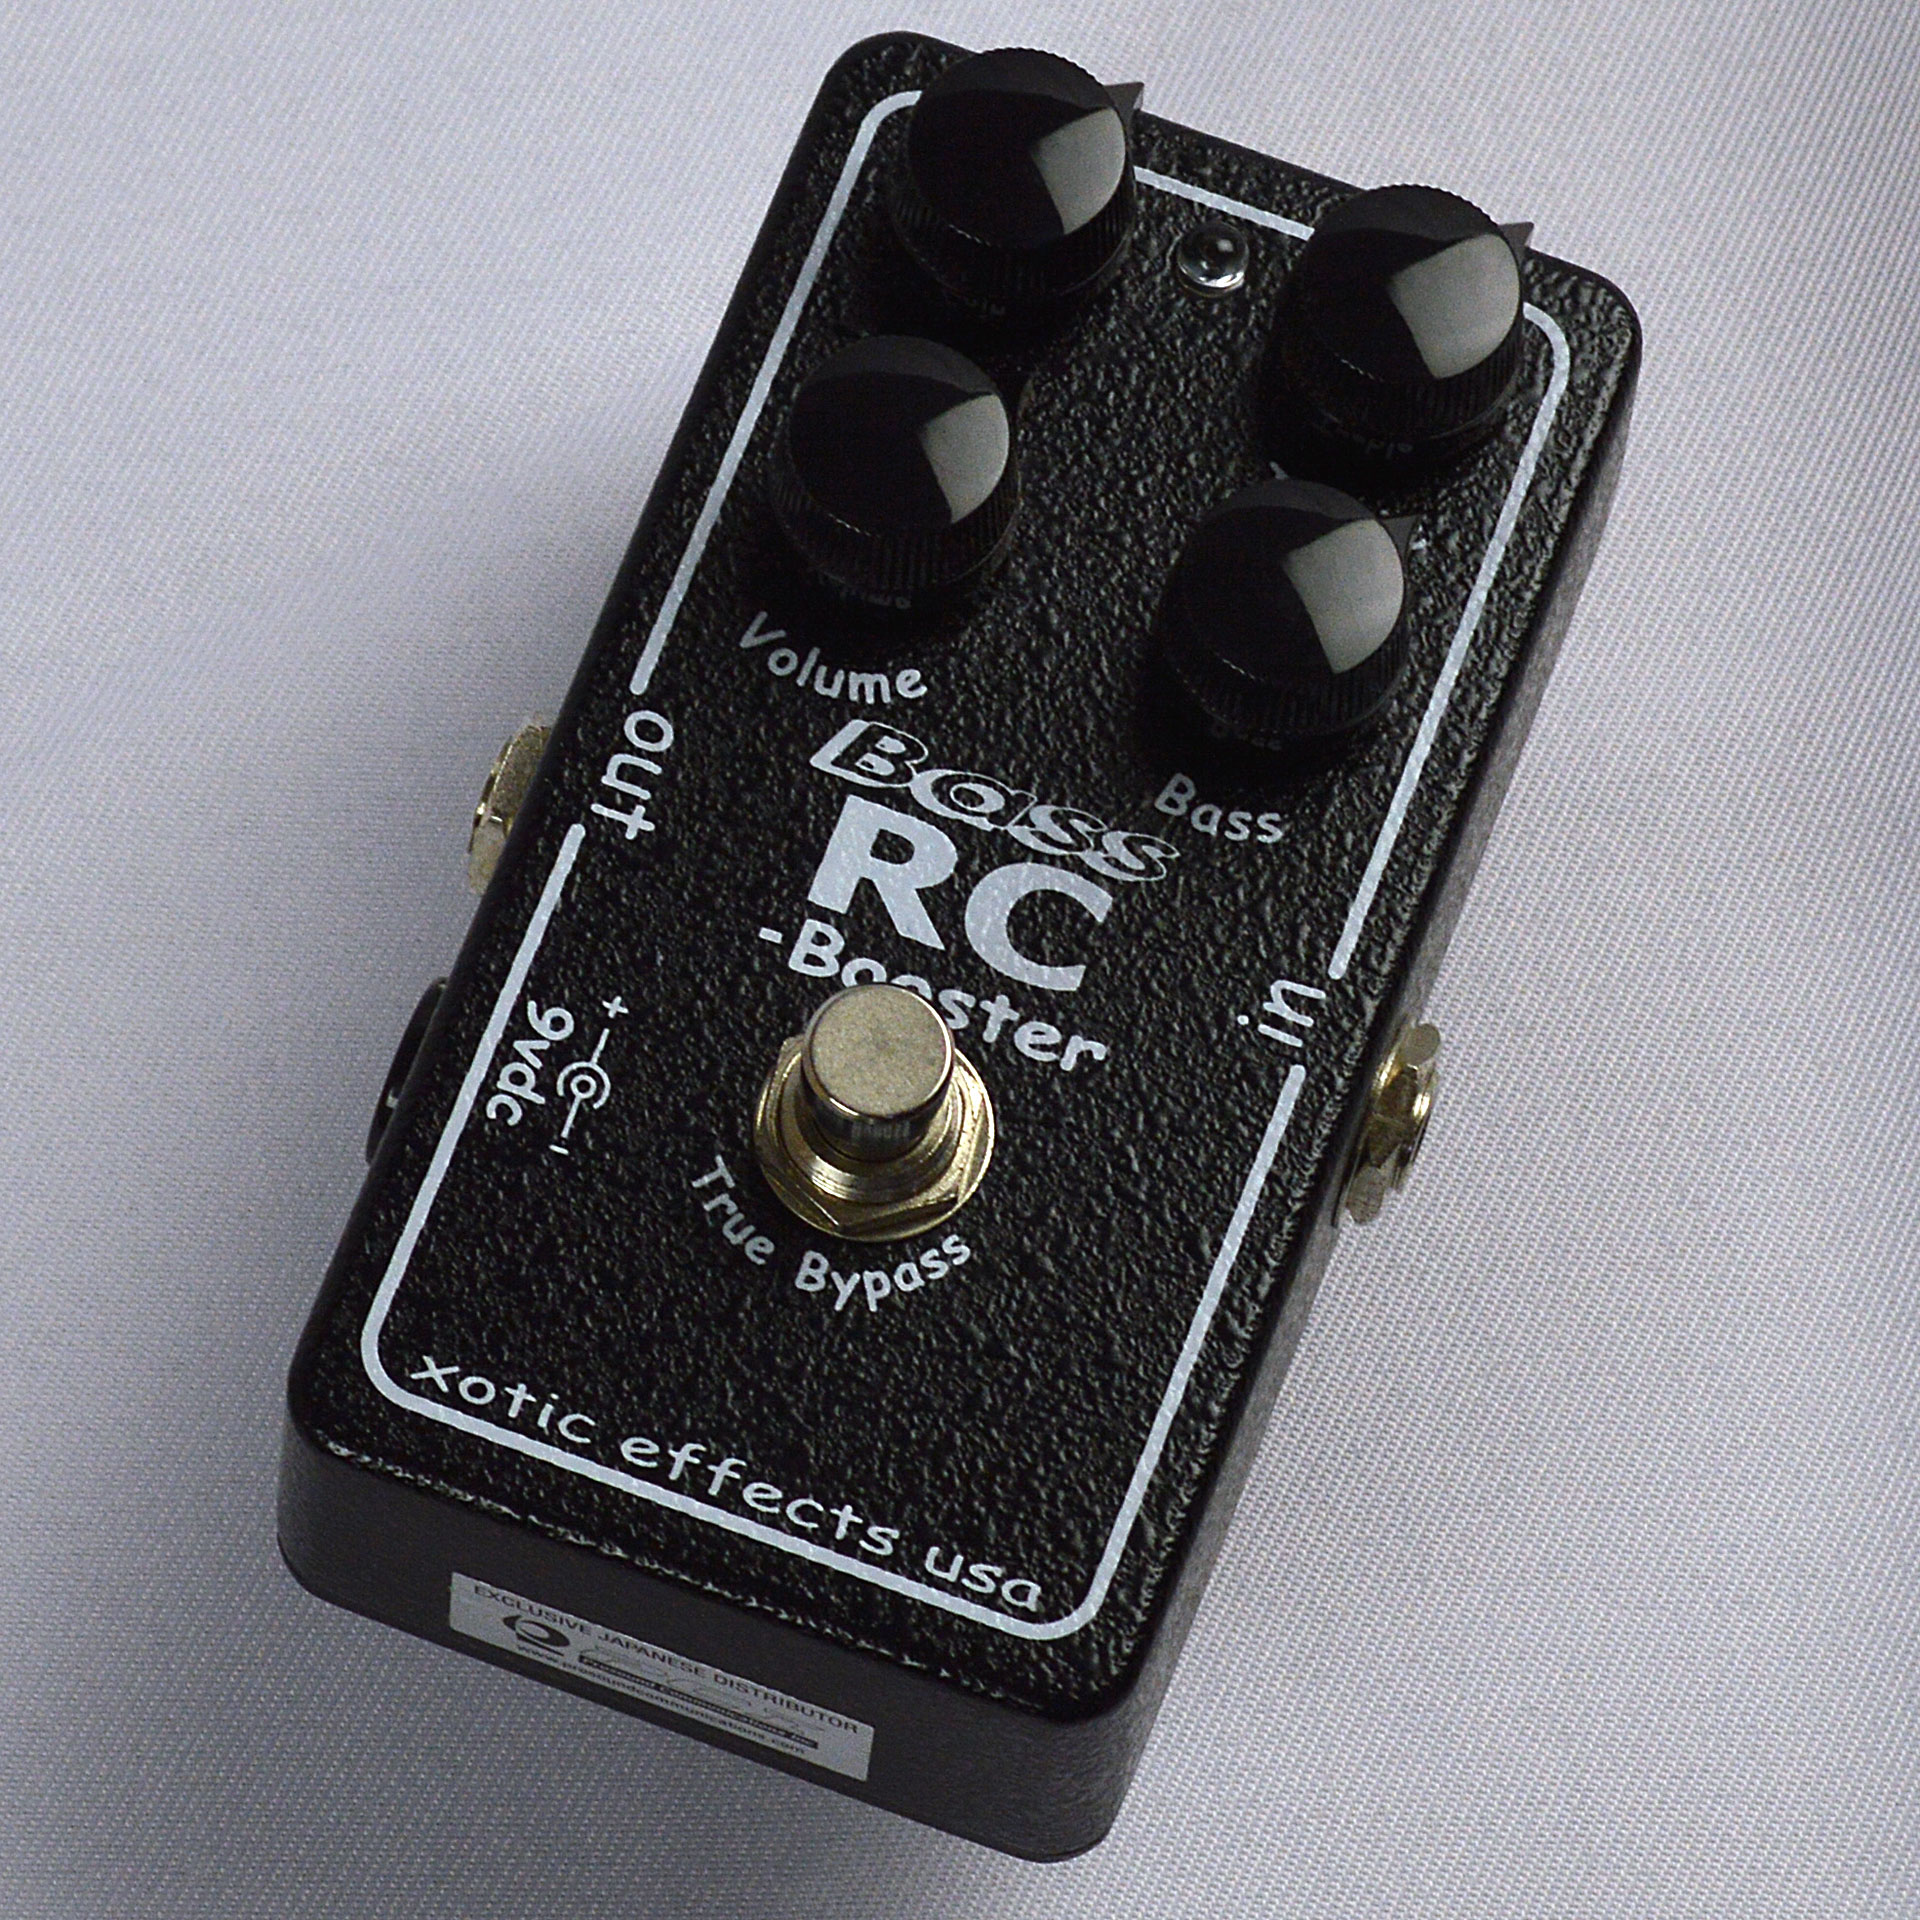 XOTIC Bass RC Boosterサムネ画像